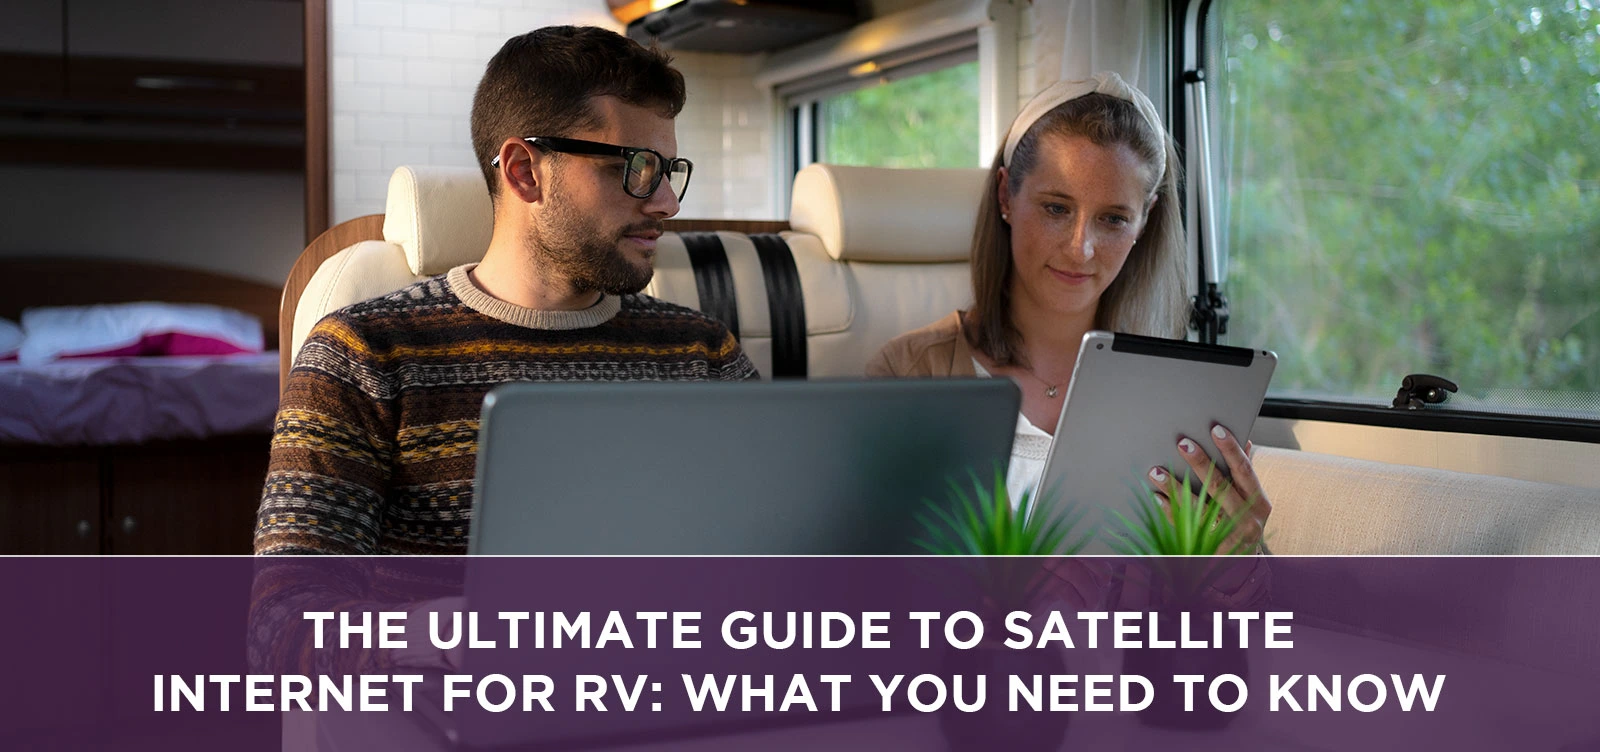 The Ultimate Guide to Satellite Internet for RV: What You Need to Know